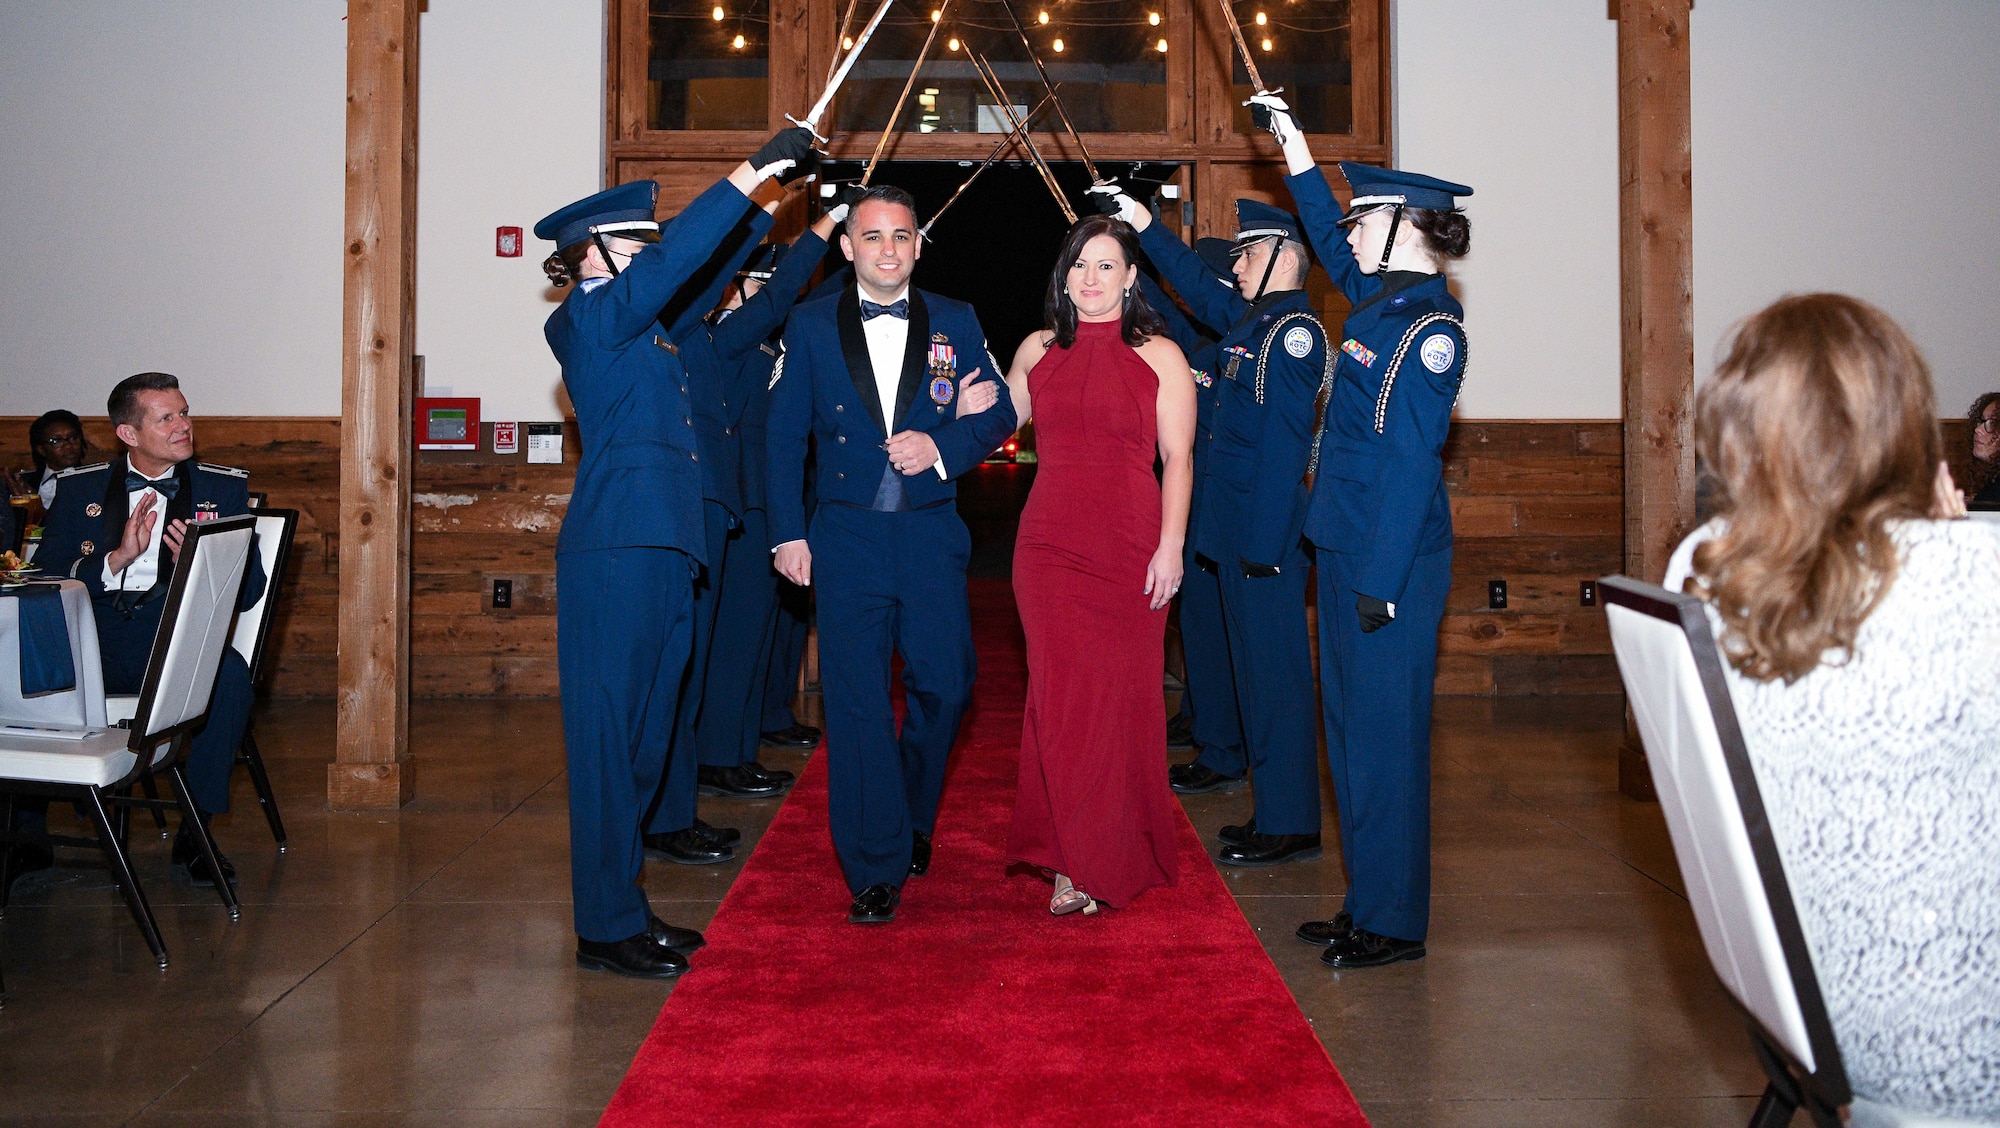 Master Sgt. Alexander James, a recruiter with the 350th Recruiting Squadron and his wife Amanda James pose for a photo inside the Gruene Events Center at New Braunfels, Texas, March 10, 2022, during the 43rd annual Operation Blue Suit award banquet.